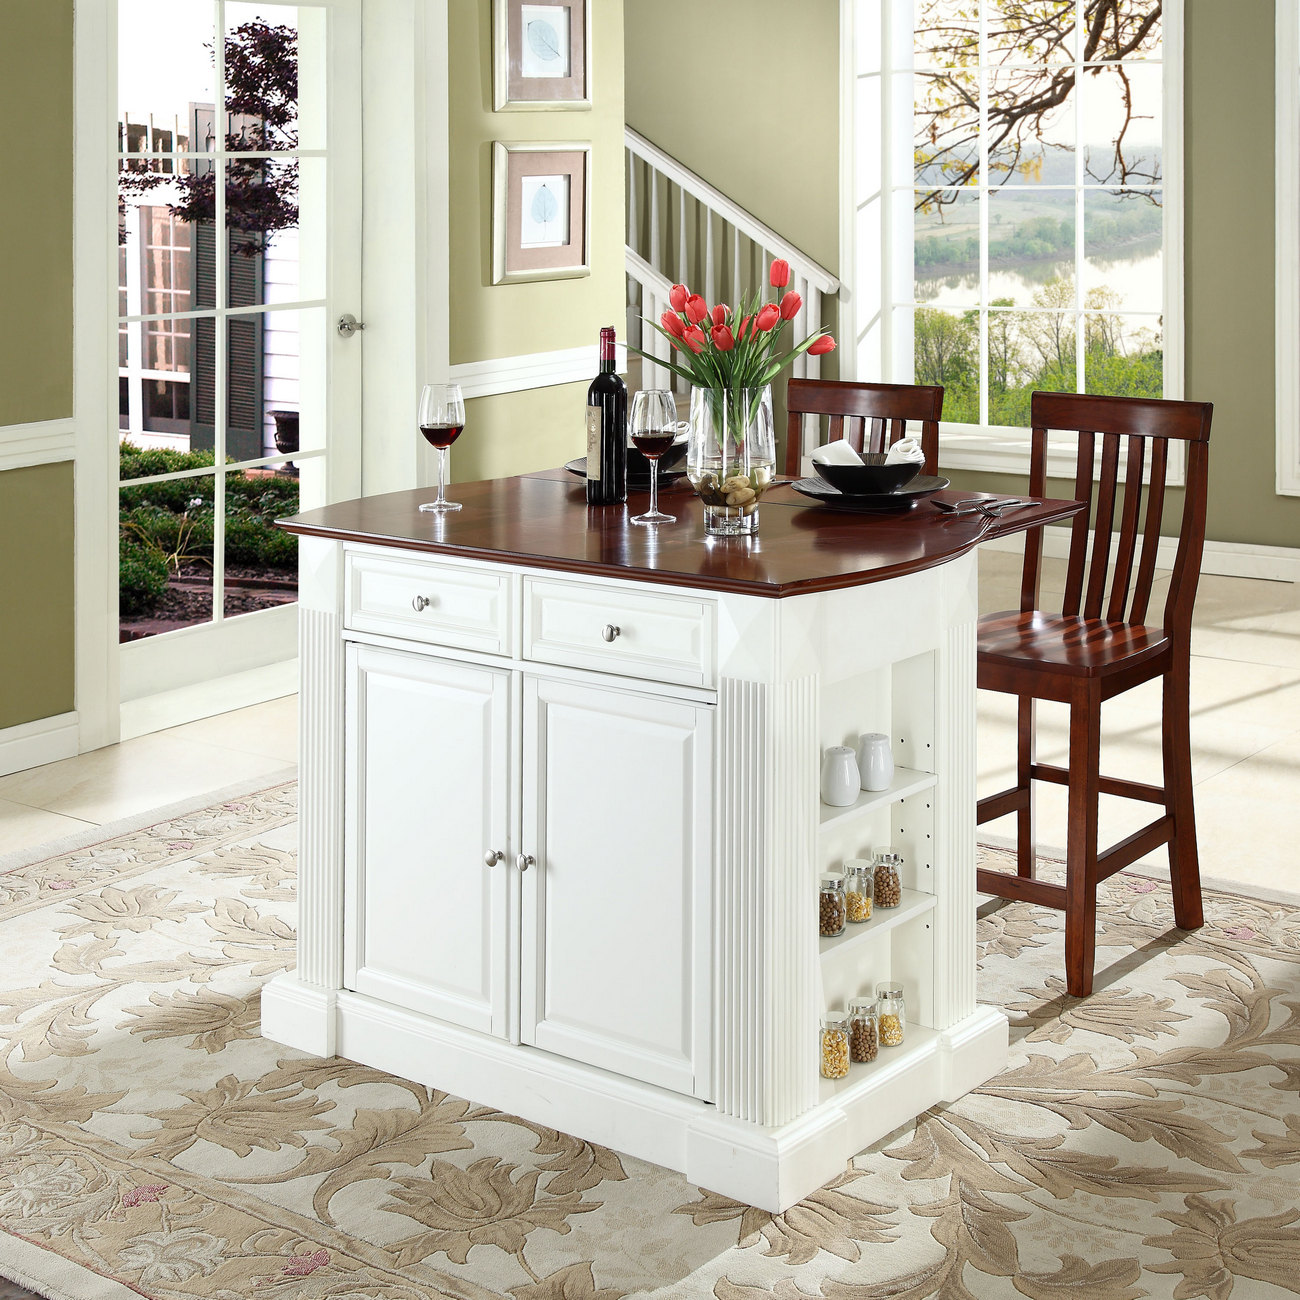 Coventry Drop Leaf Breakfast Bar Top Kitchen Island In White Finish W/ 24" Cherry School House Stools - Crosley Kf300072wh